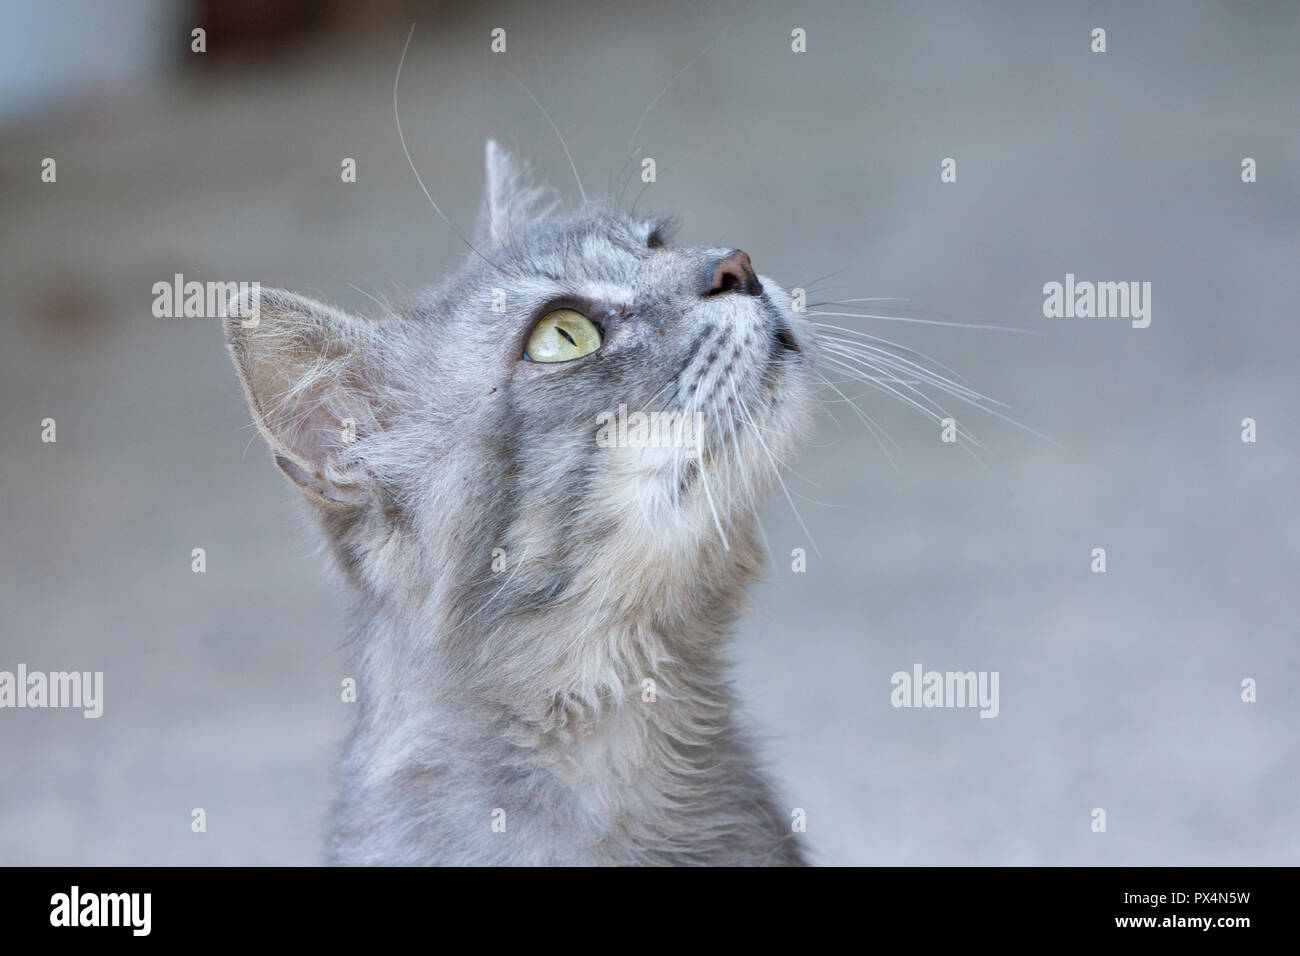 Closeup to gray cat with green eyes Stock Photo